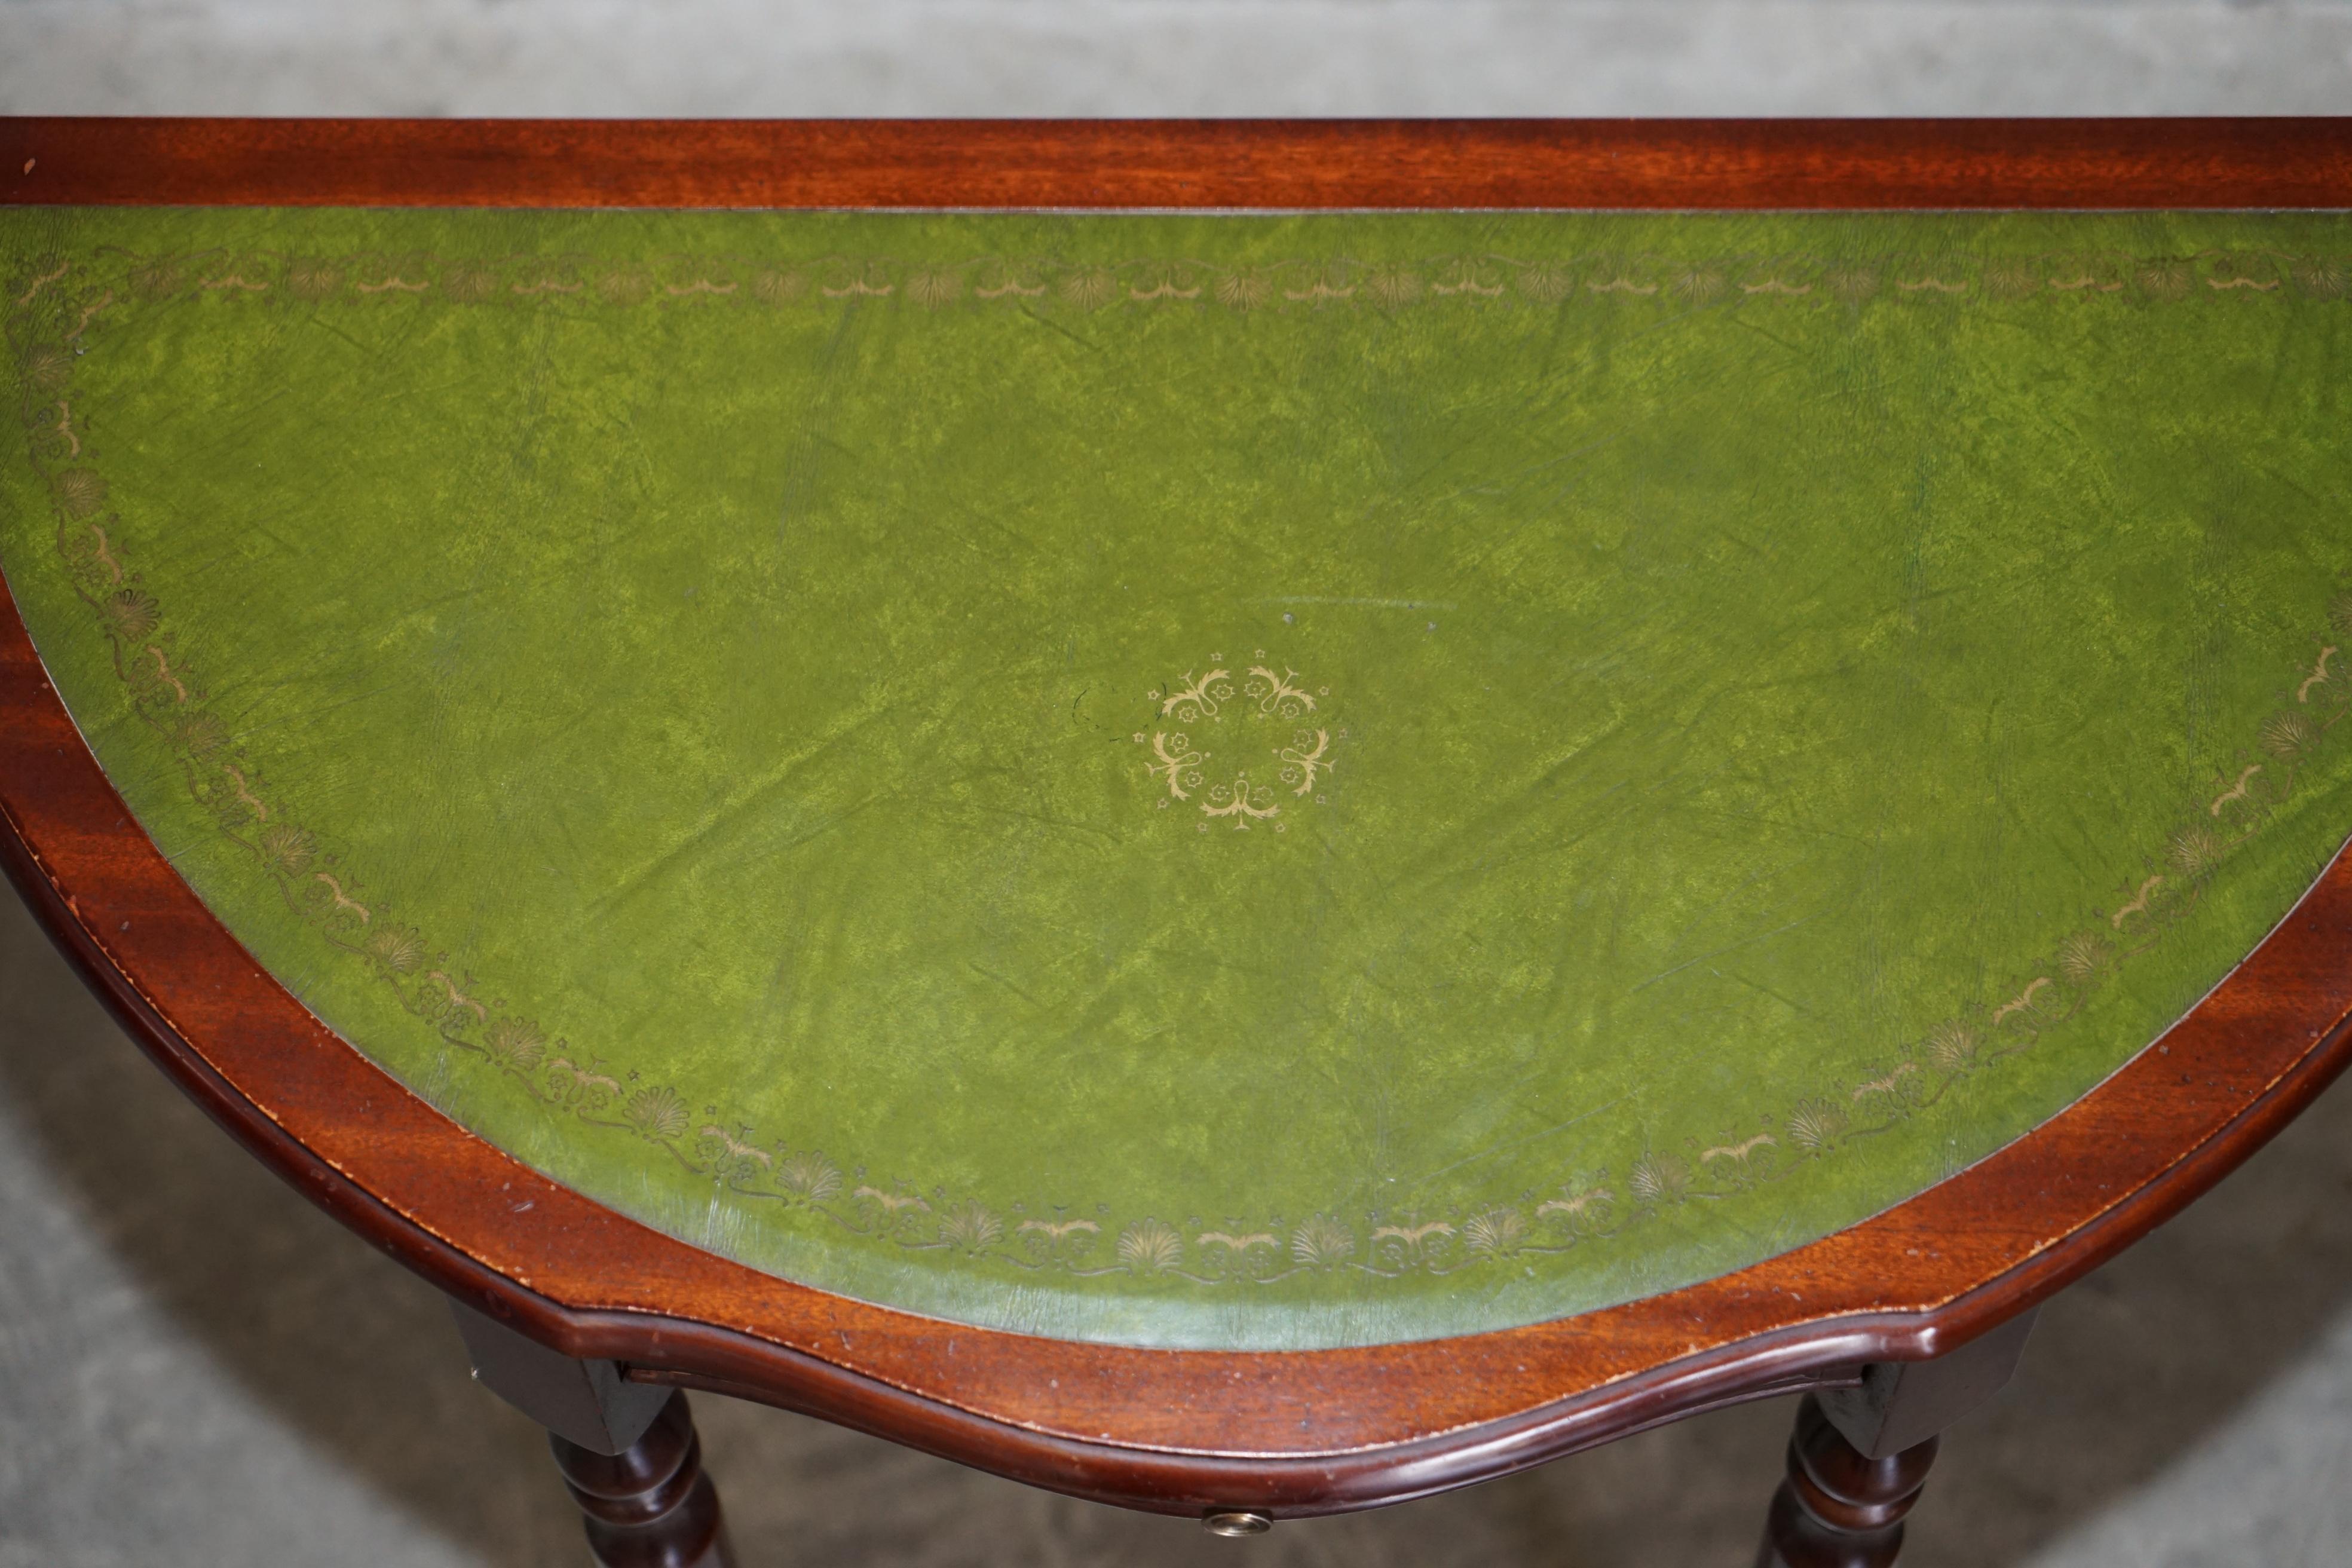 20th Century Lovely Vintage Demi Lune Console Table with Green Leather Top and Single Drawer